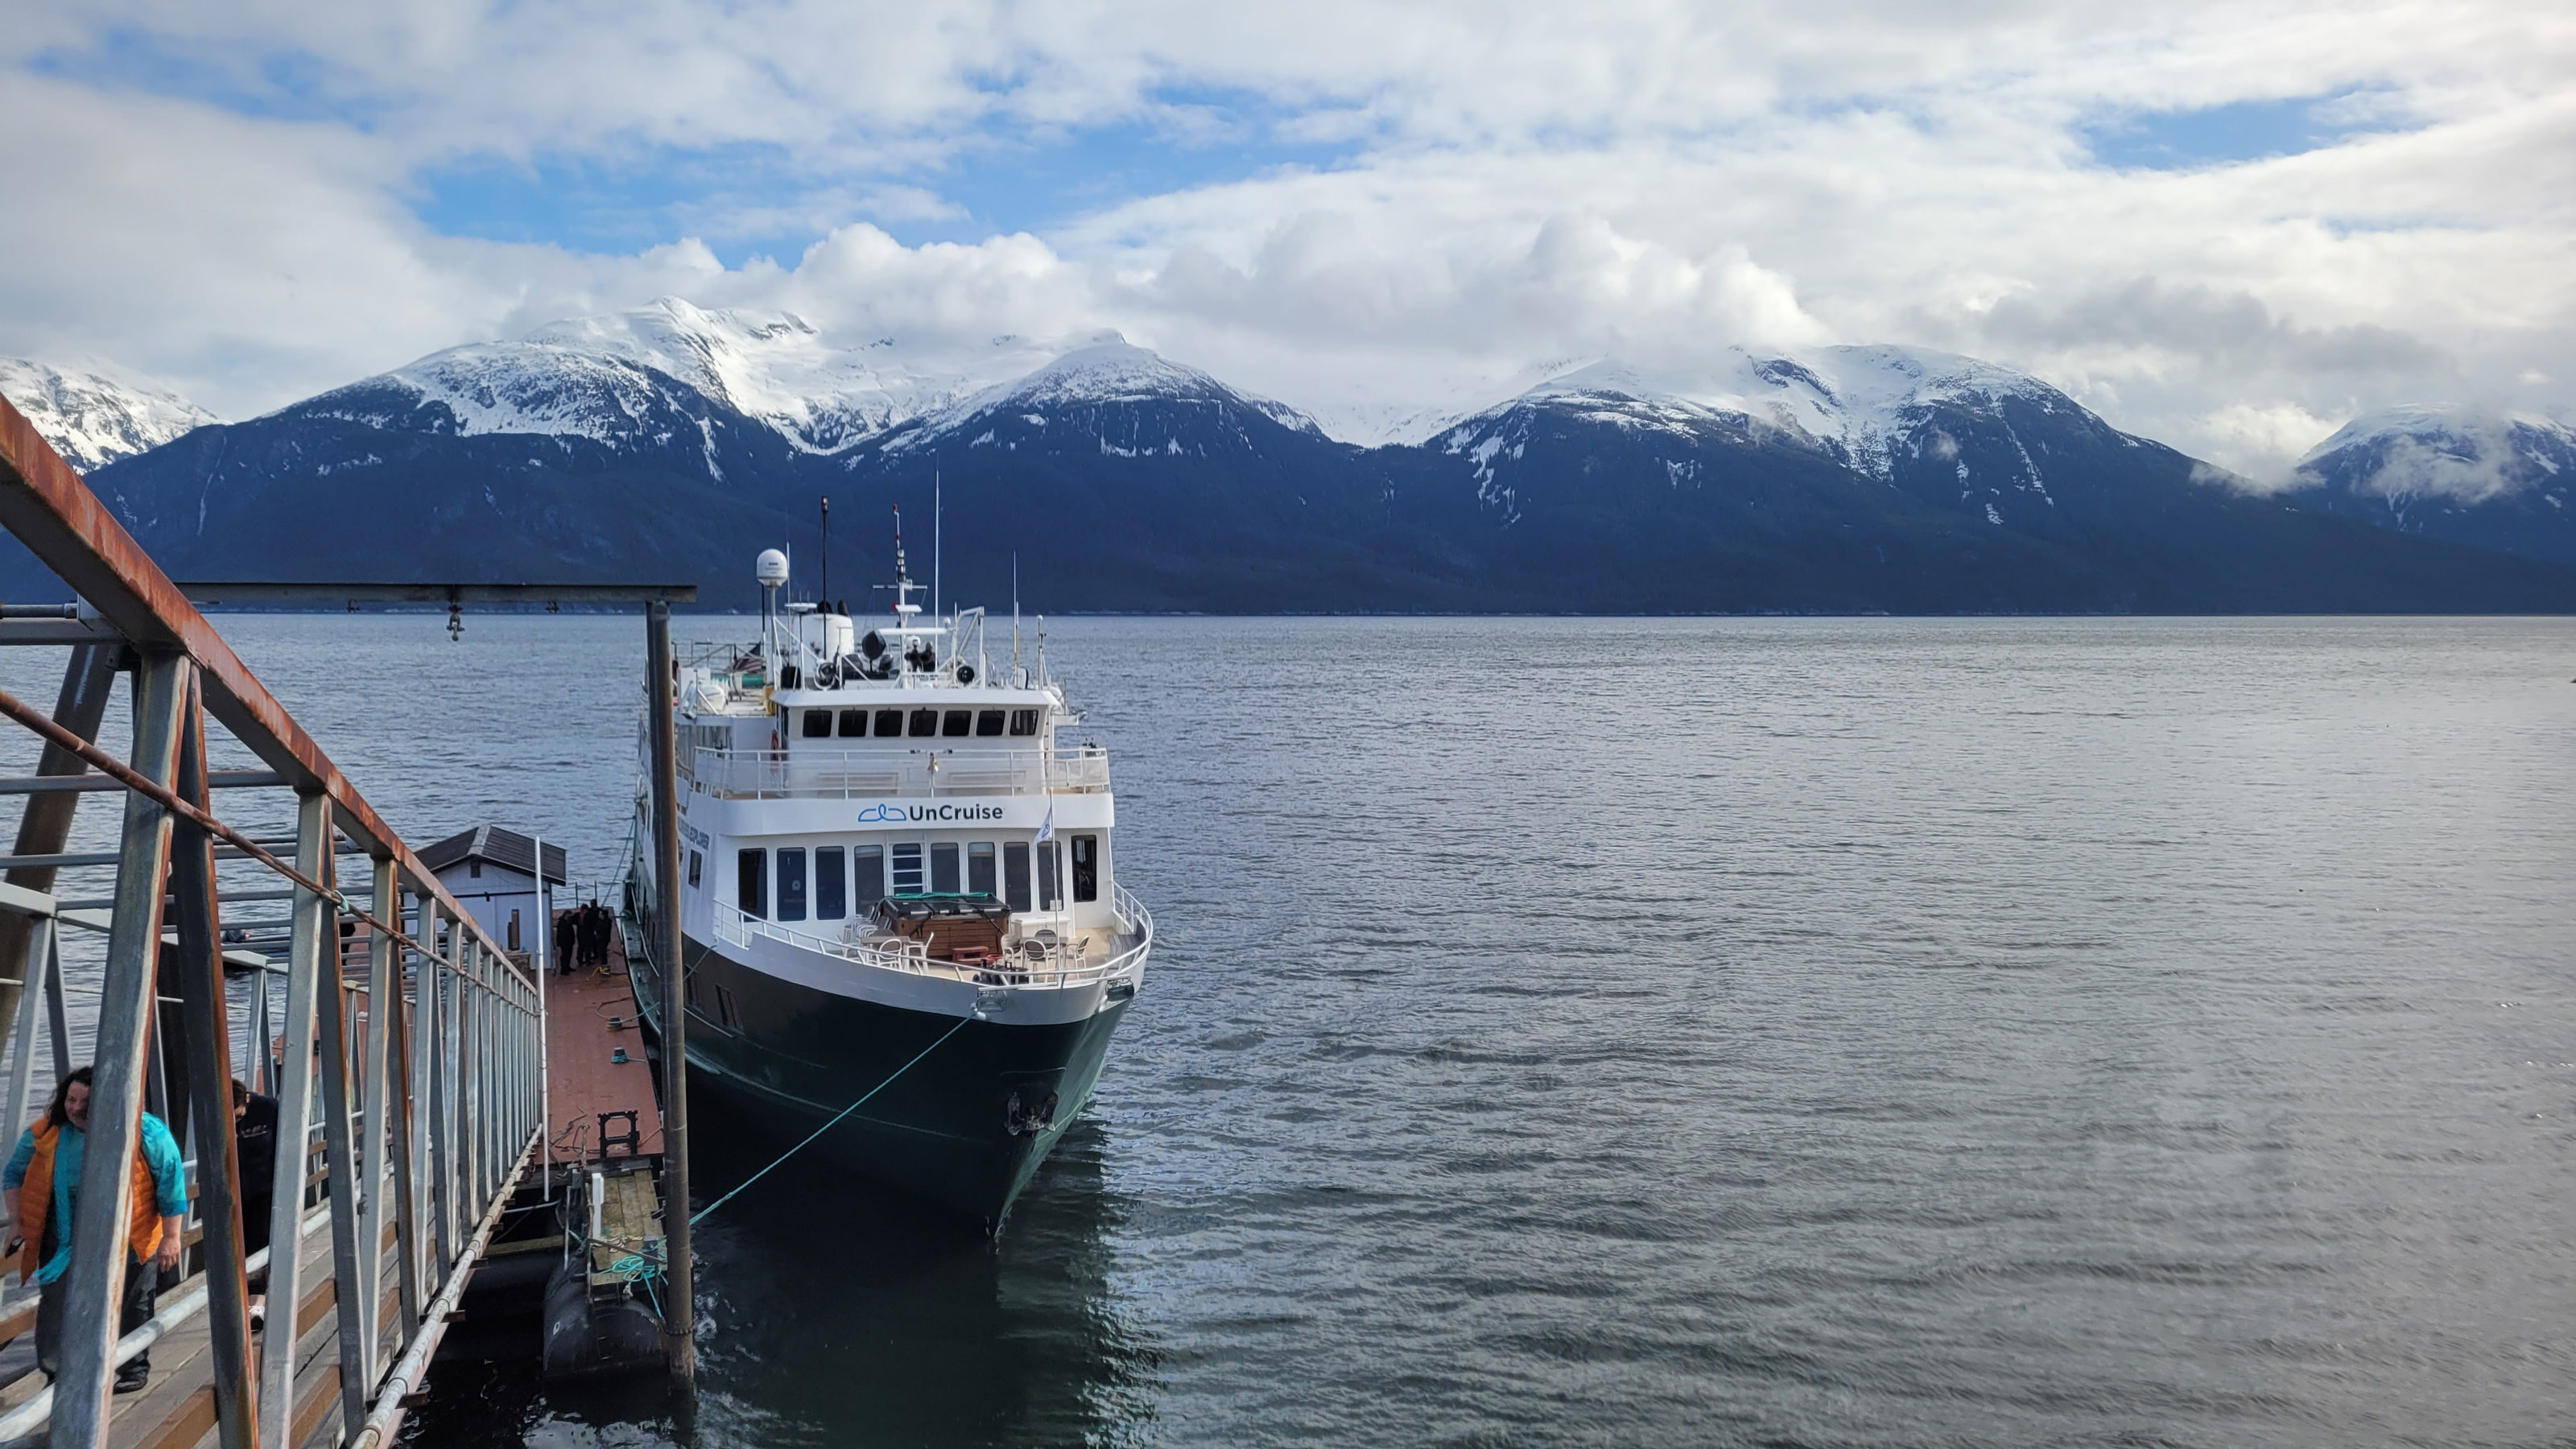 Docked at Haines